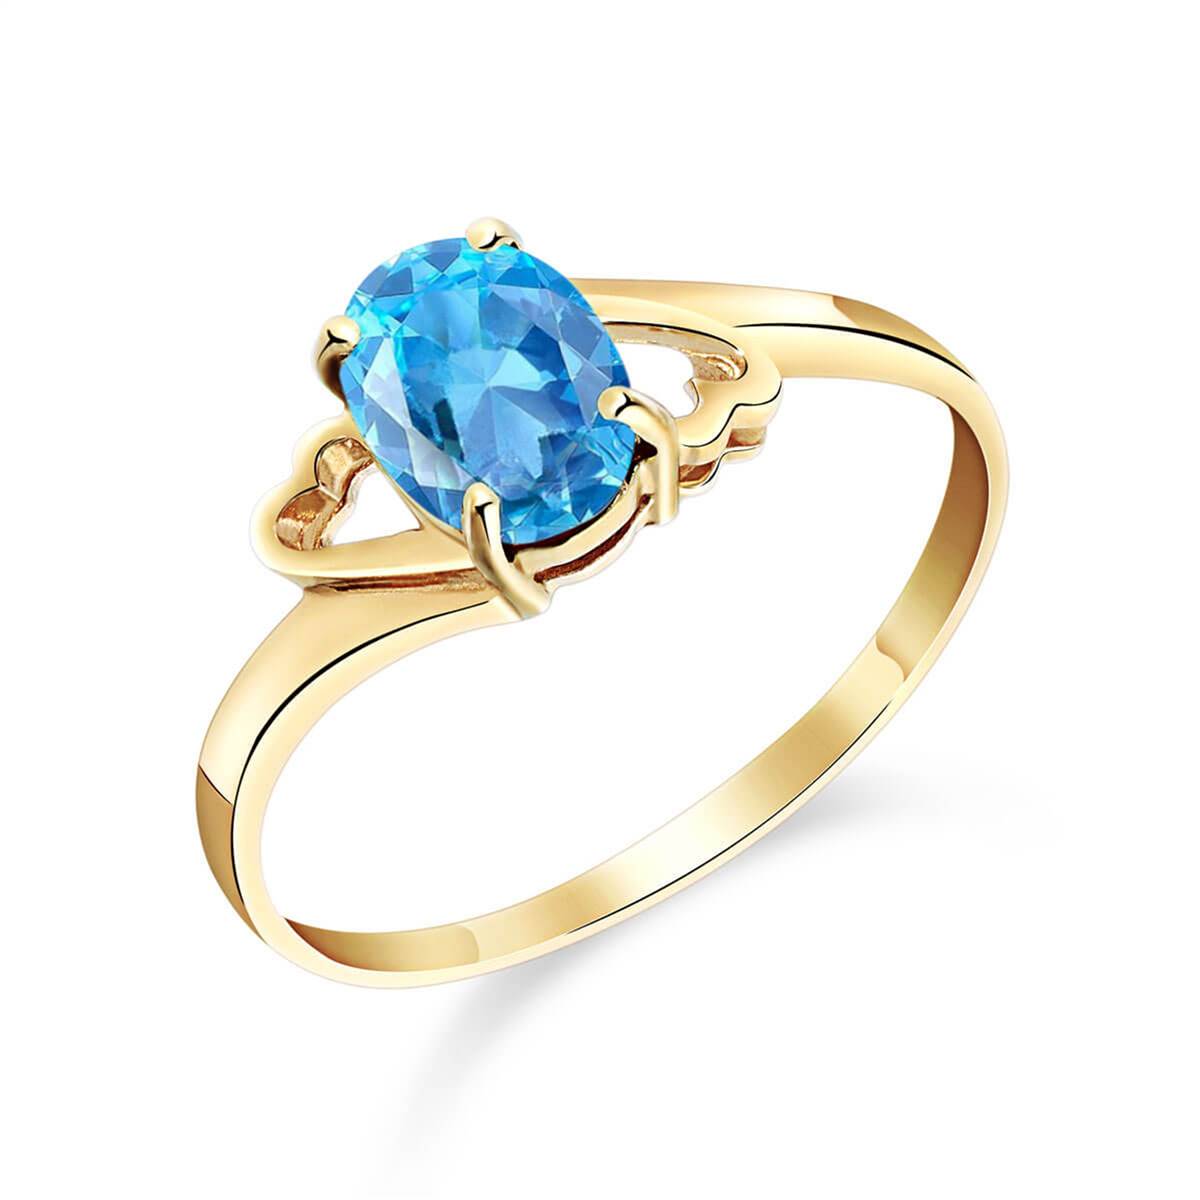 0.95 Carat 14K Solid Yellow Gold Next Level Blue Topaz Ring